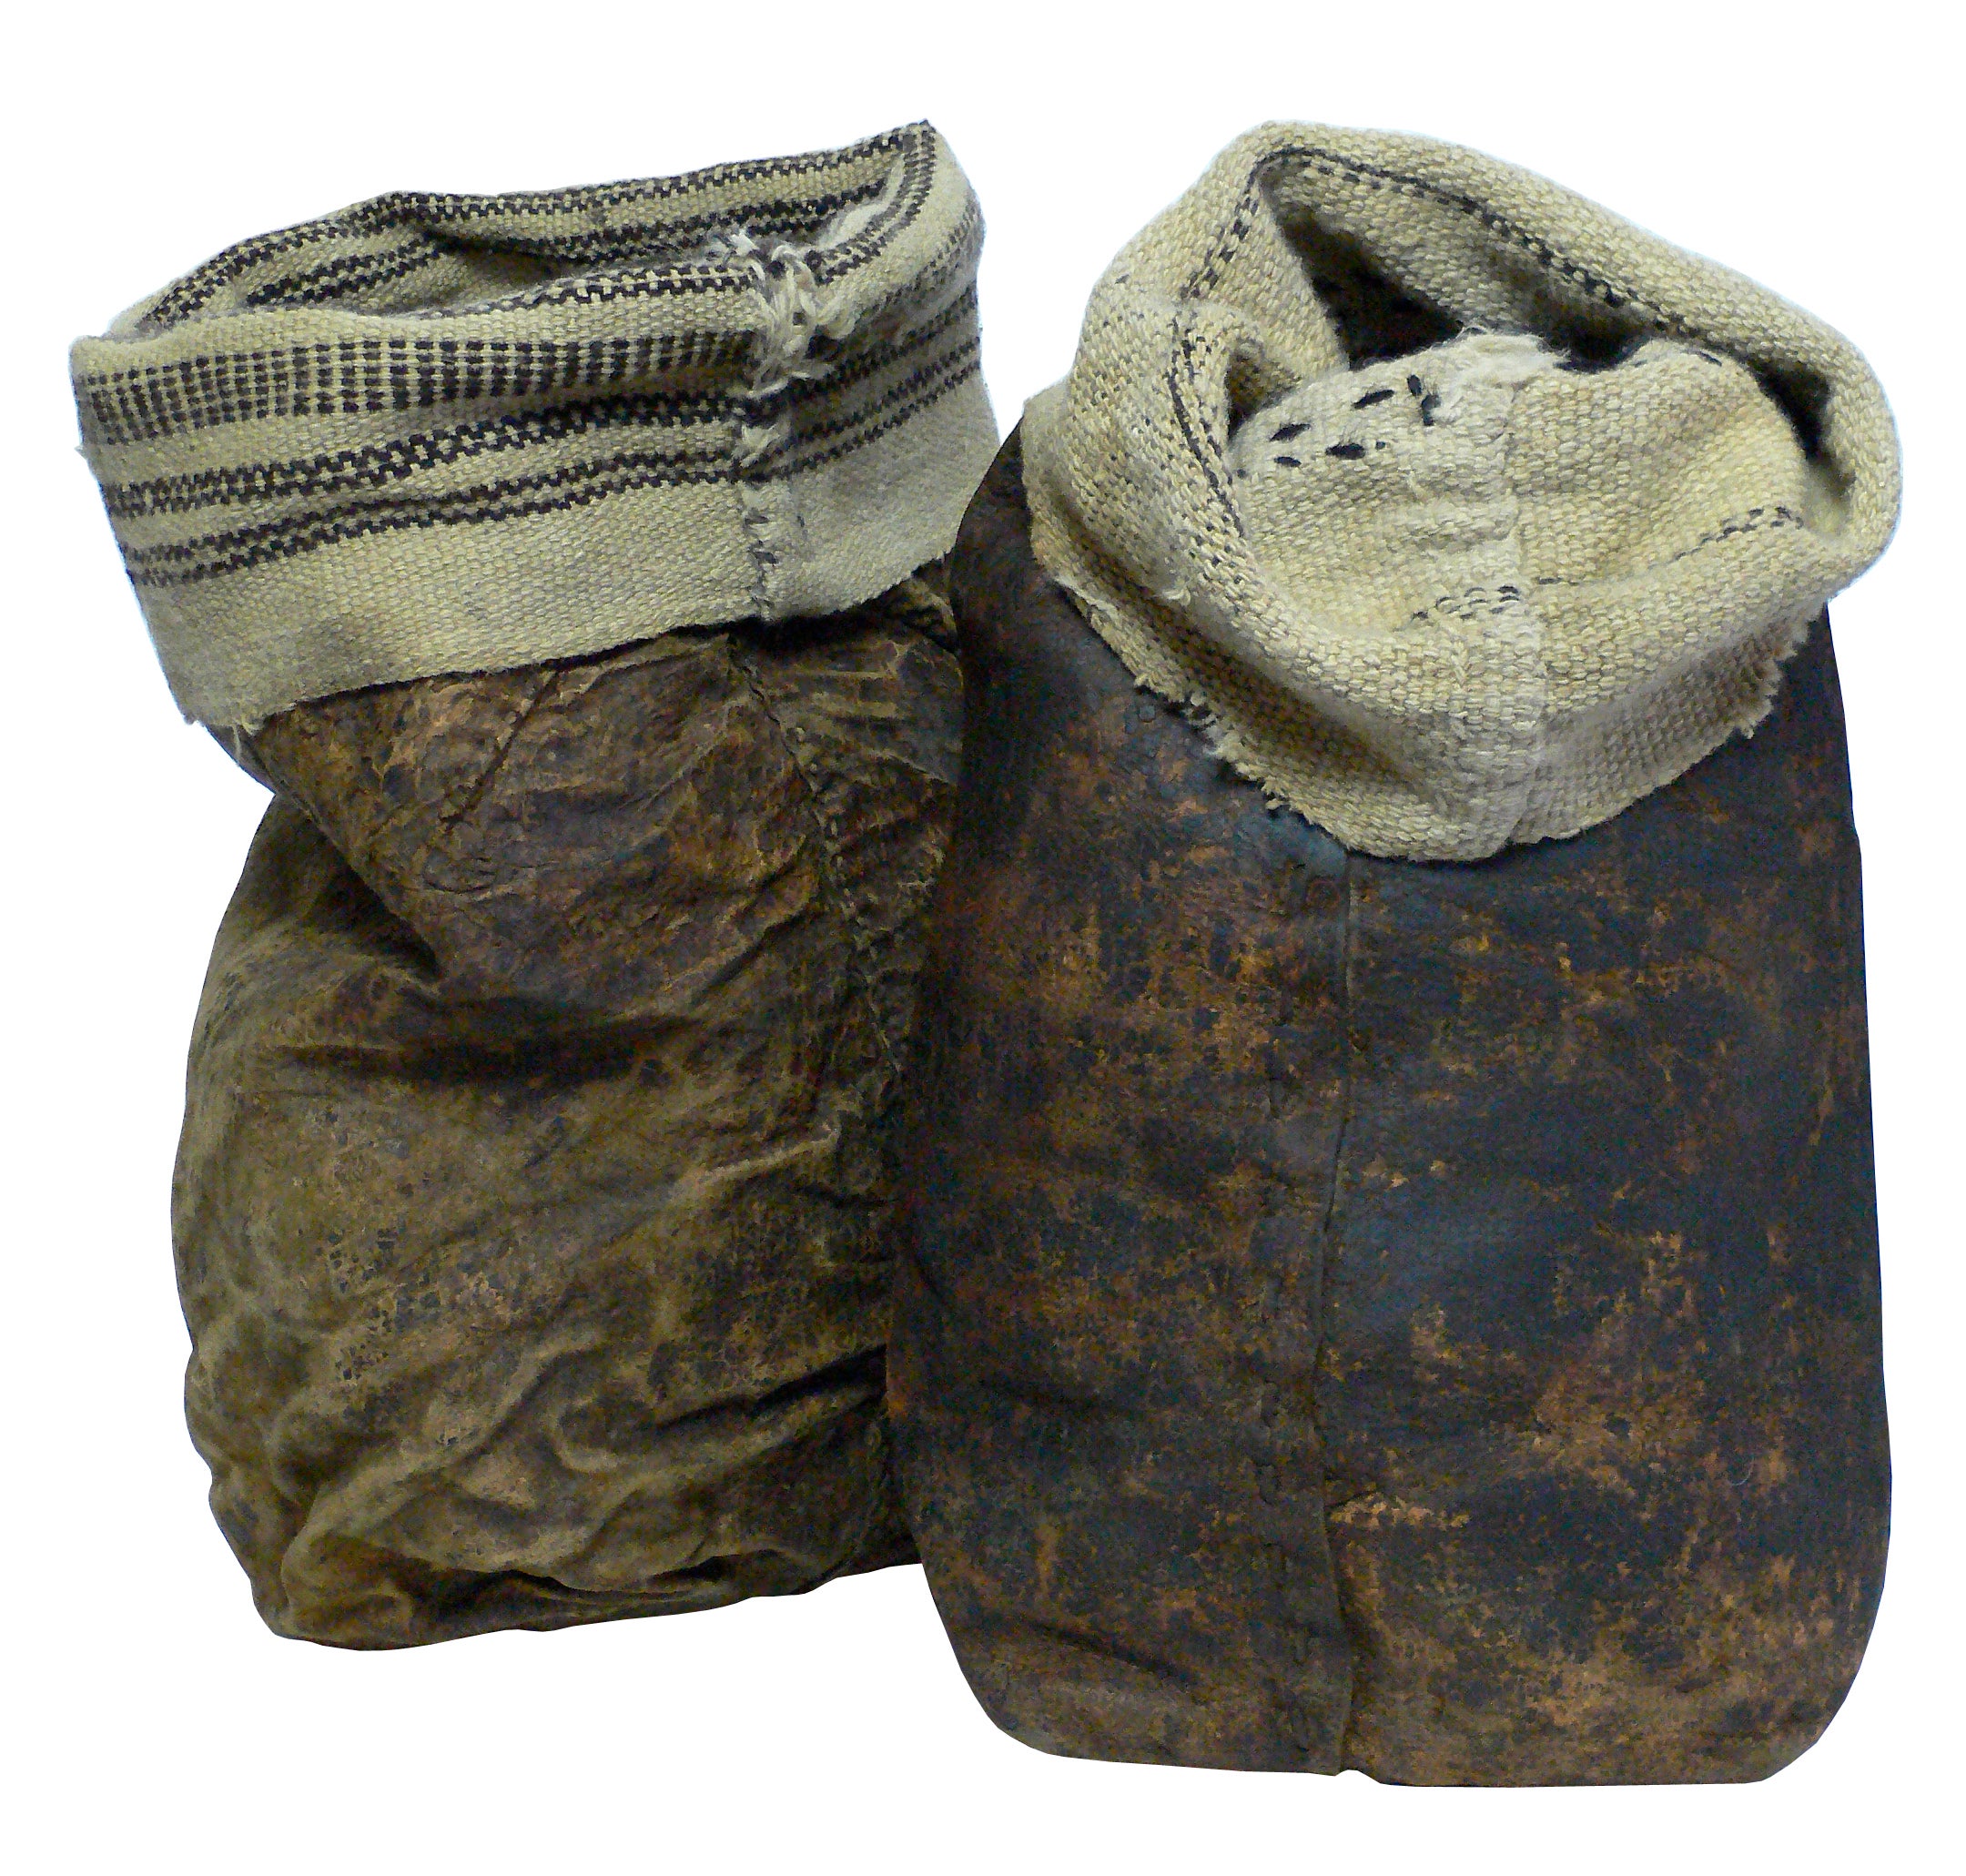 Leather and Knit Grain Sacks from Tibet